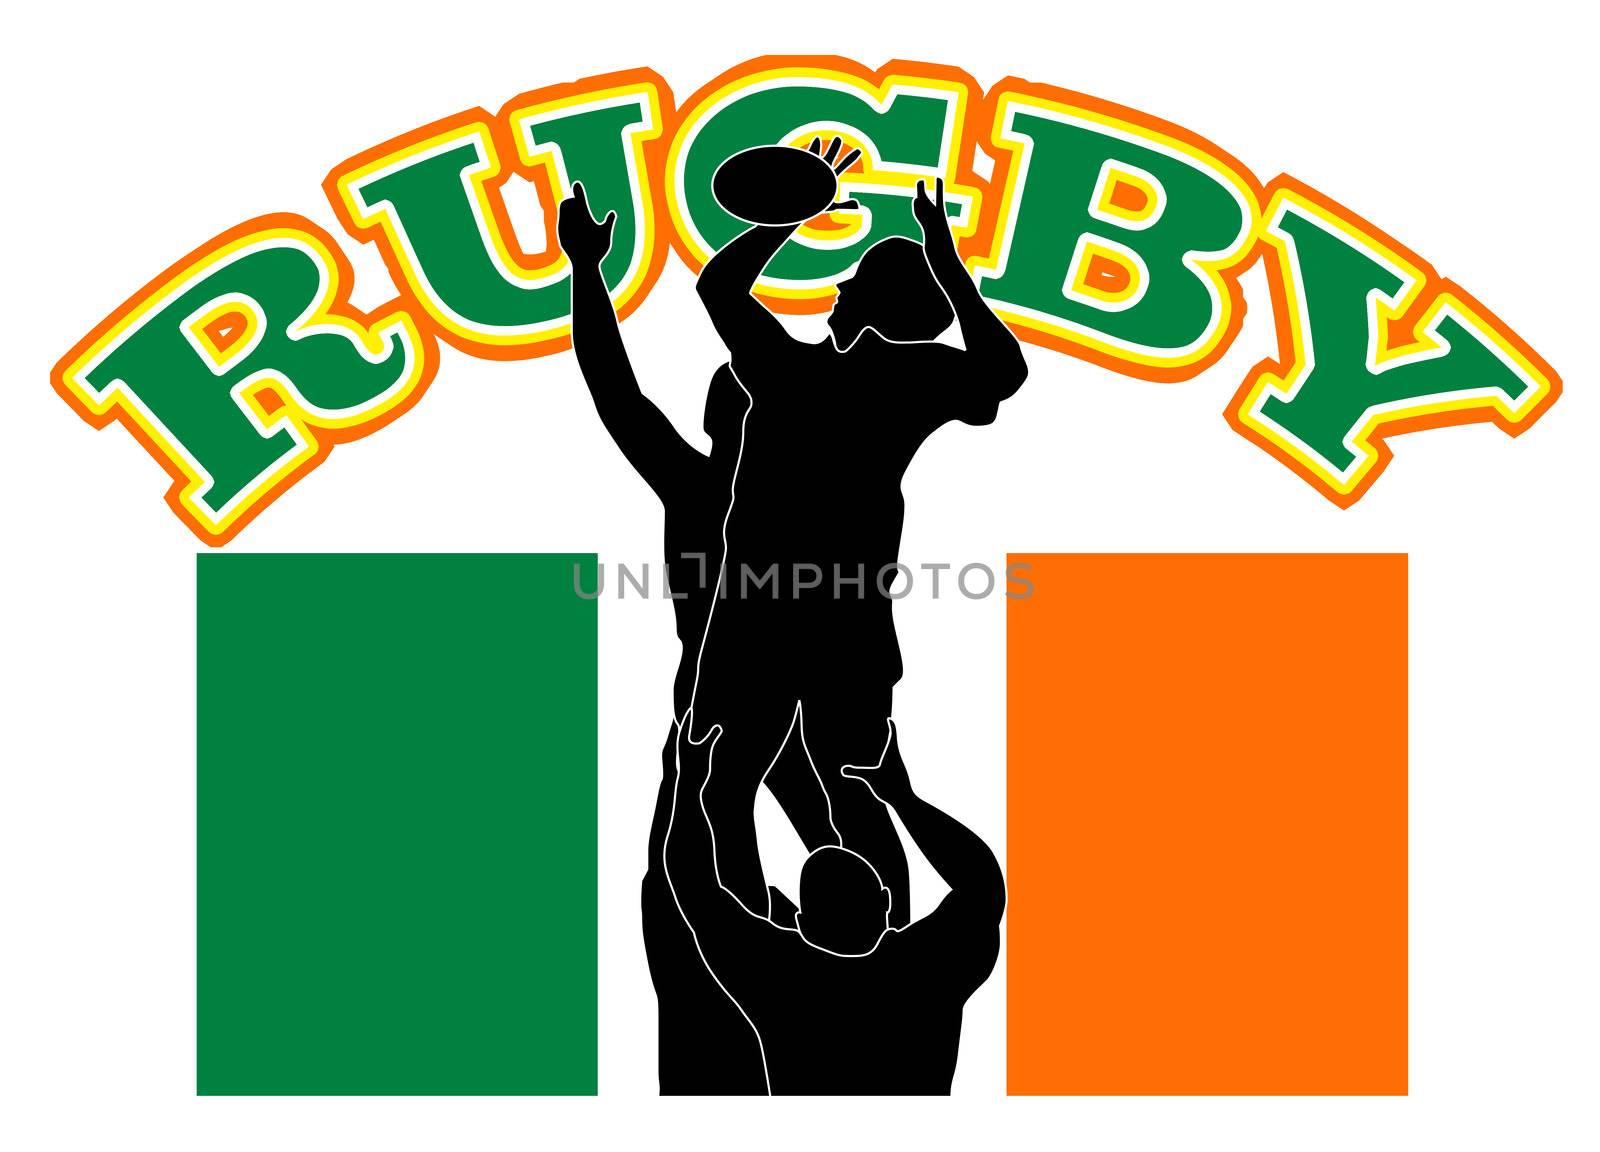 illustration of rugby player catcihng lineout throw with Ireland flag in background